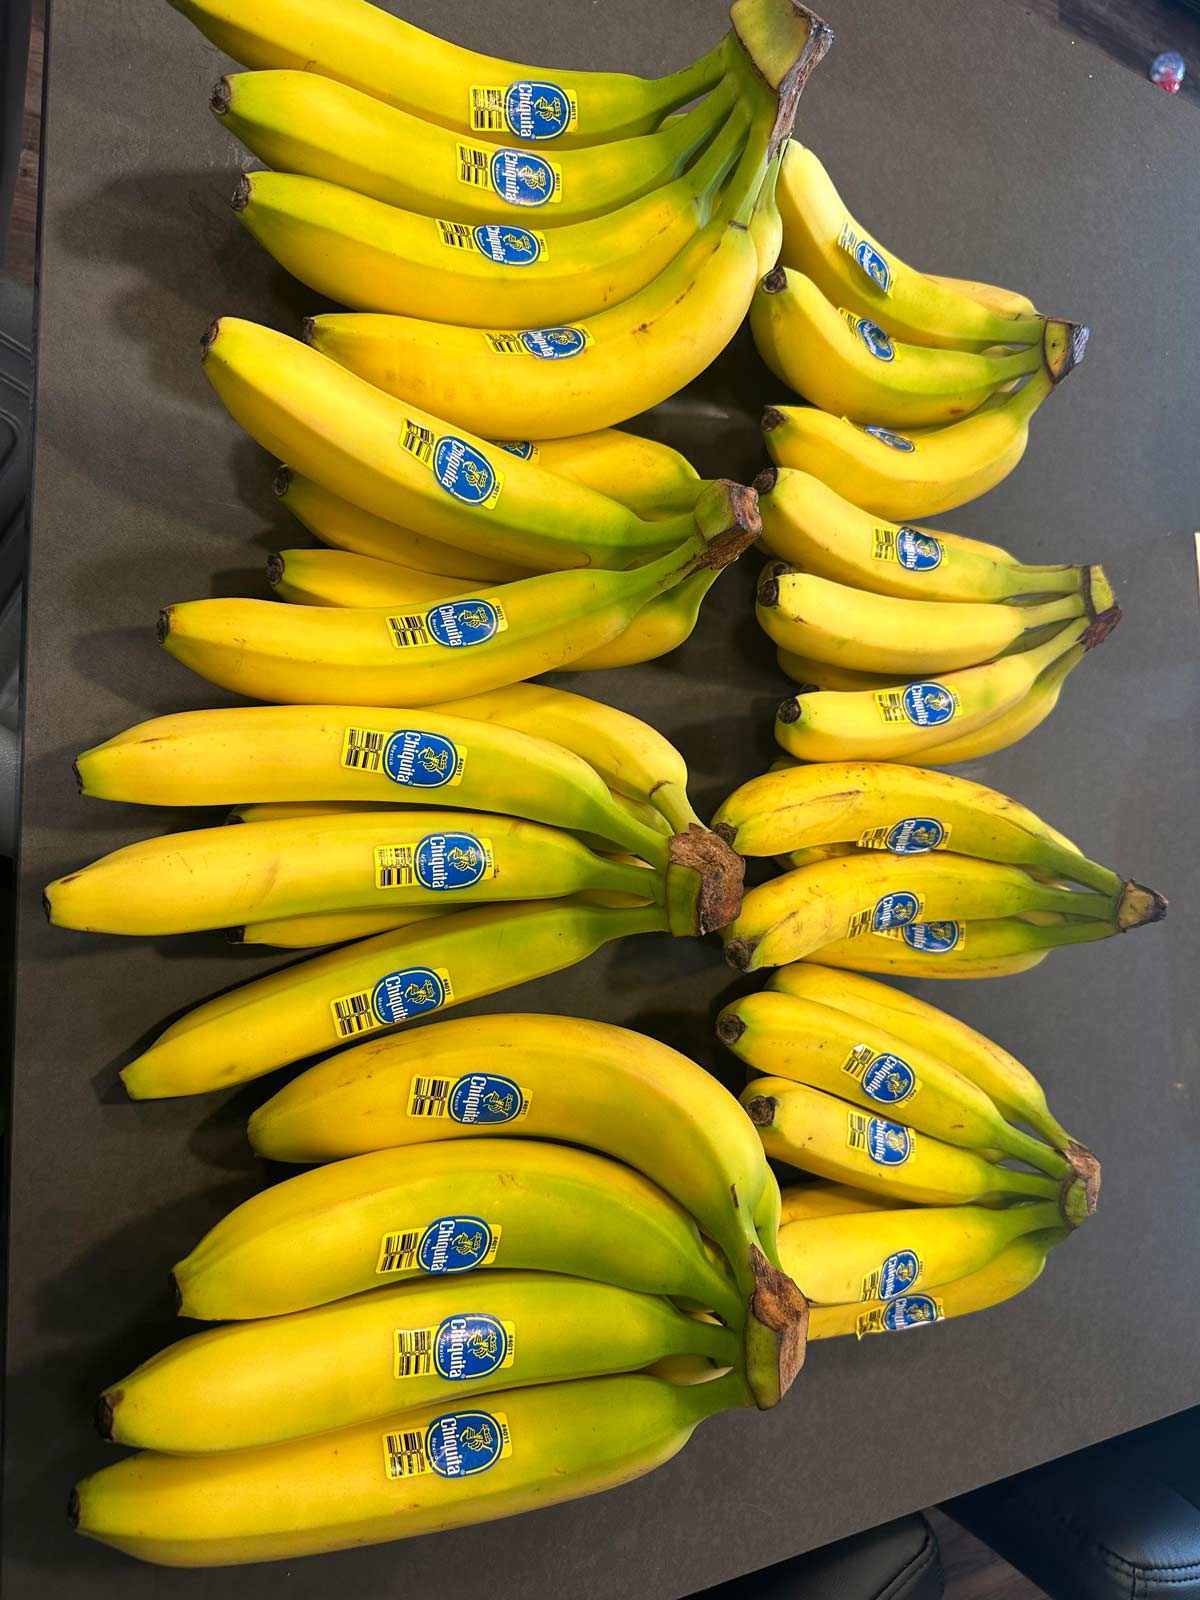 I requested 8 bananas in my weekly grocery pickup order... They gave me 8 bunches, and managed to only charge me $0.68 - the price of one single banana